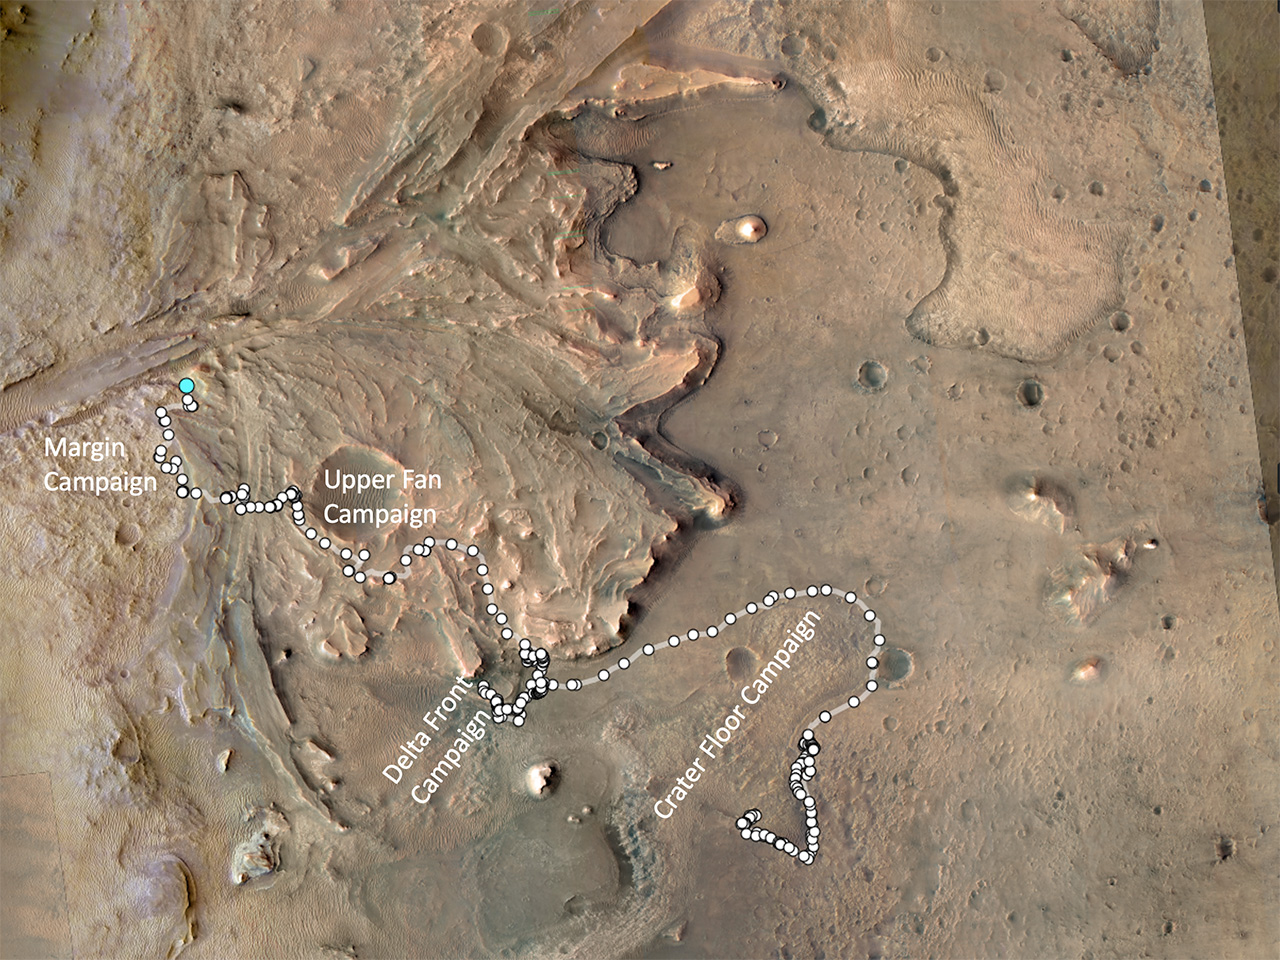 The path taken by NASA’s Perseverance Mars rover during the first 1,000 sols (Martian days) of its mission at Jezero Crater is annotated on this overhead view taken by the HiRISE camera aboard the agency’s Mars Reconnaissance Orbiter.